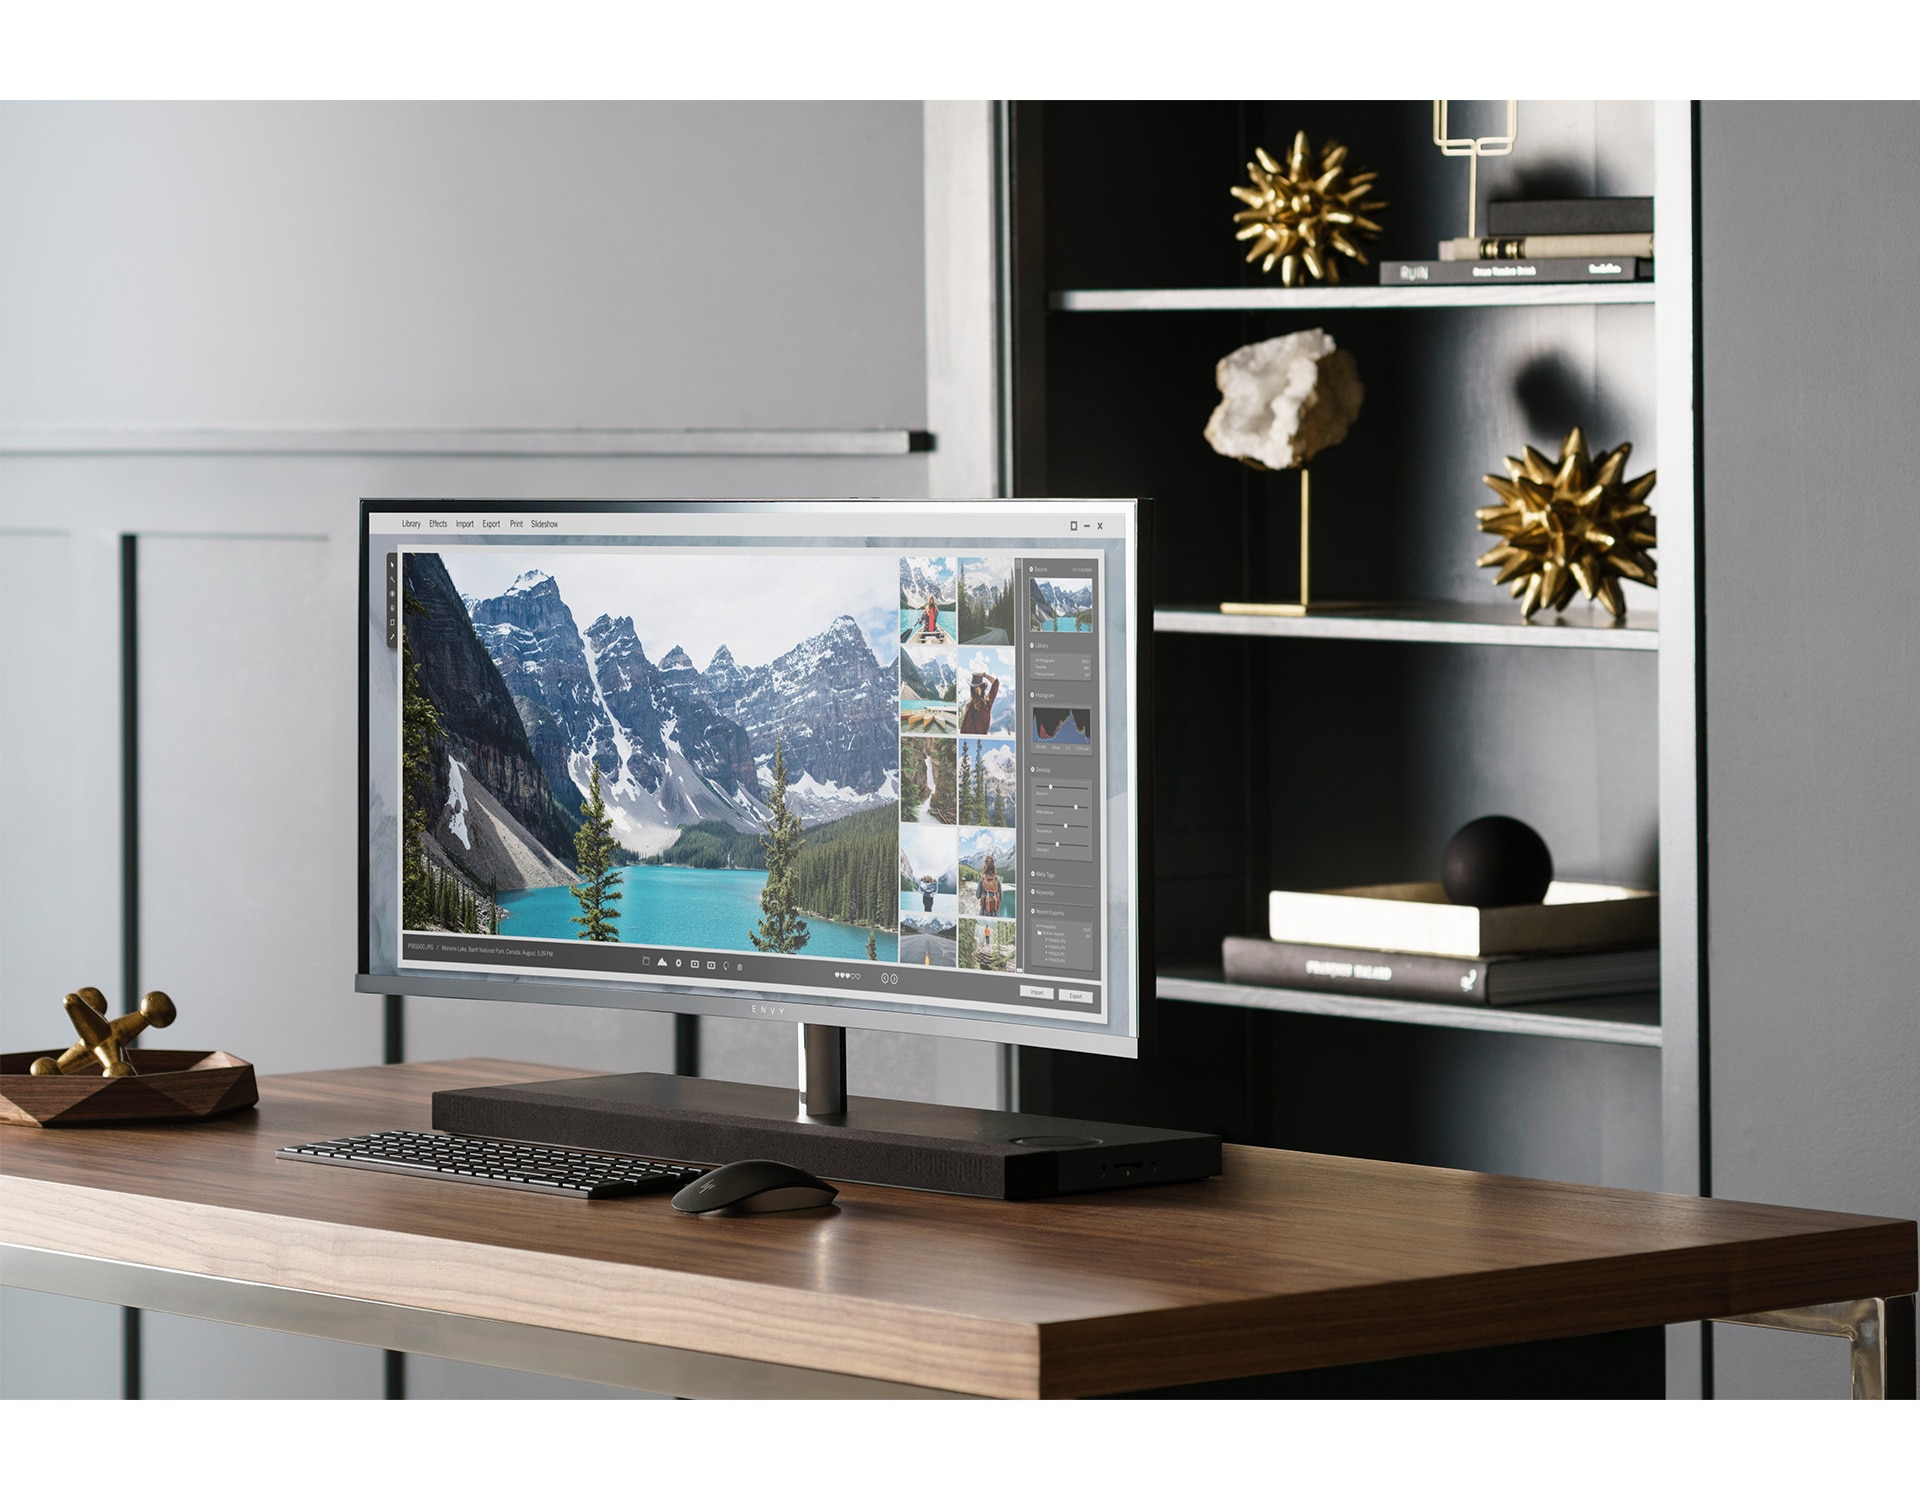 HP ENVY Curved All-in-One 34 製品詳細 - デスクトップパソコン | 日本HP